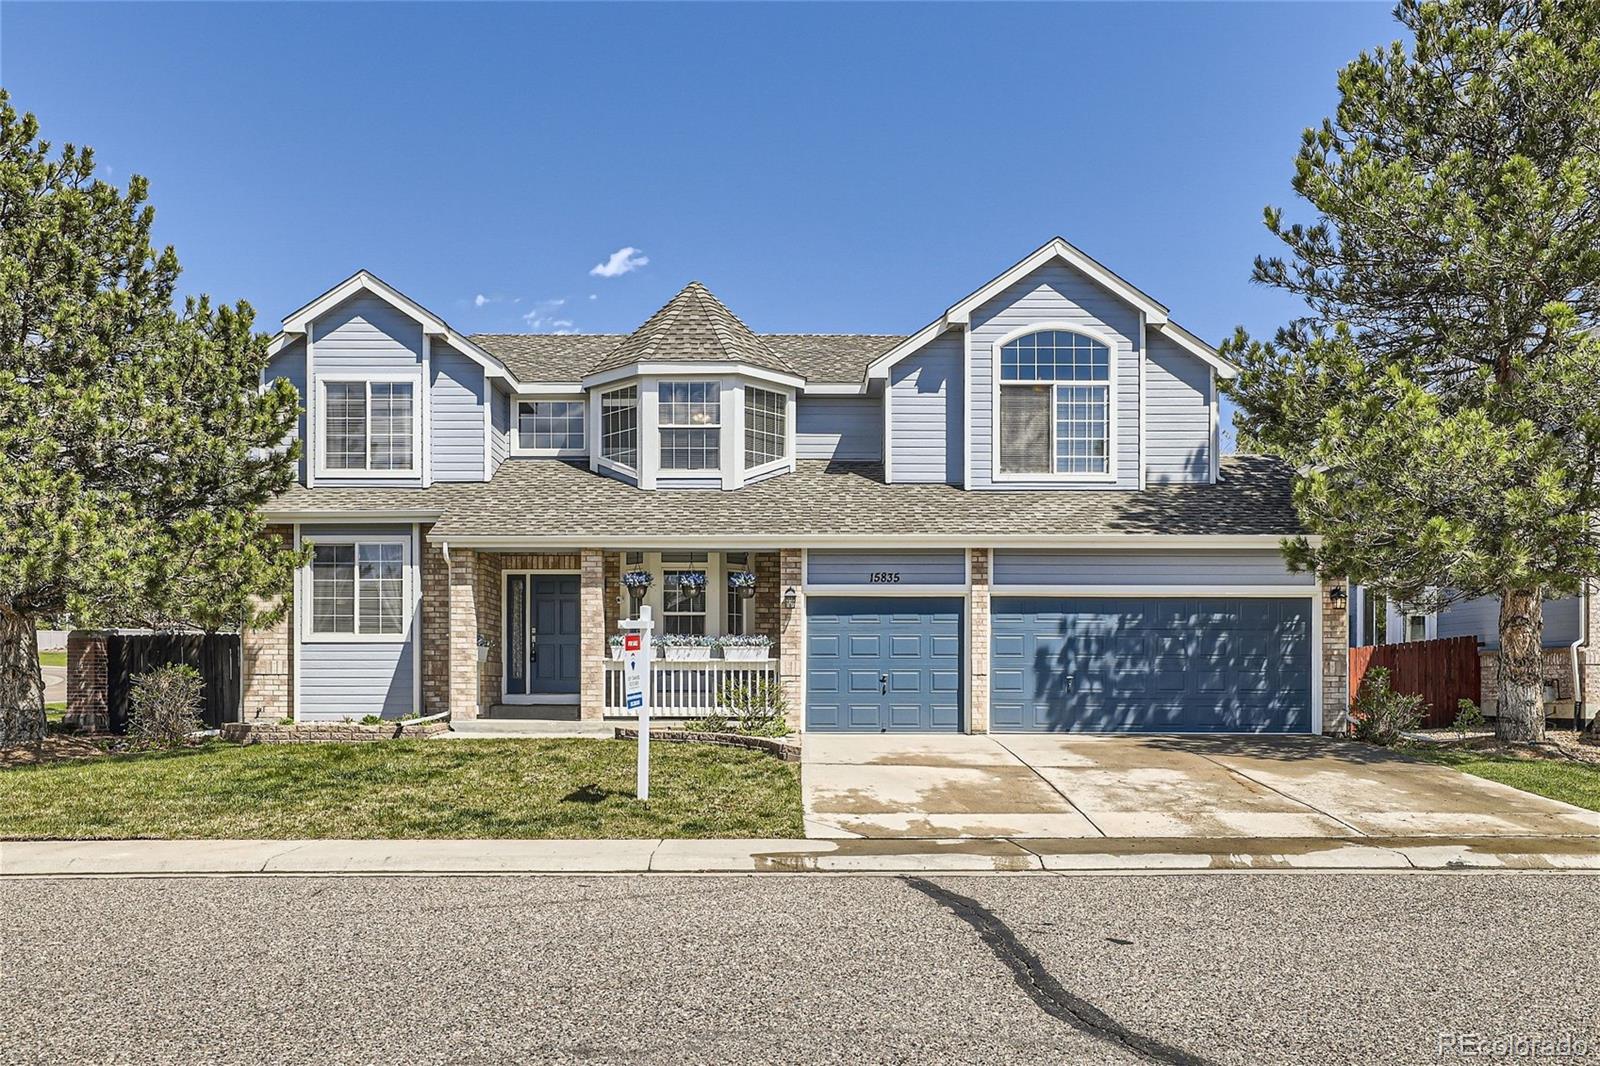 15835 W 71st Place, arvada MLS: 9332333 Beds: 6 Baths: 6 Price: $1,170,000